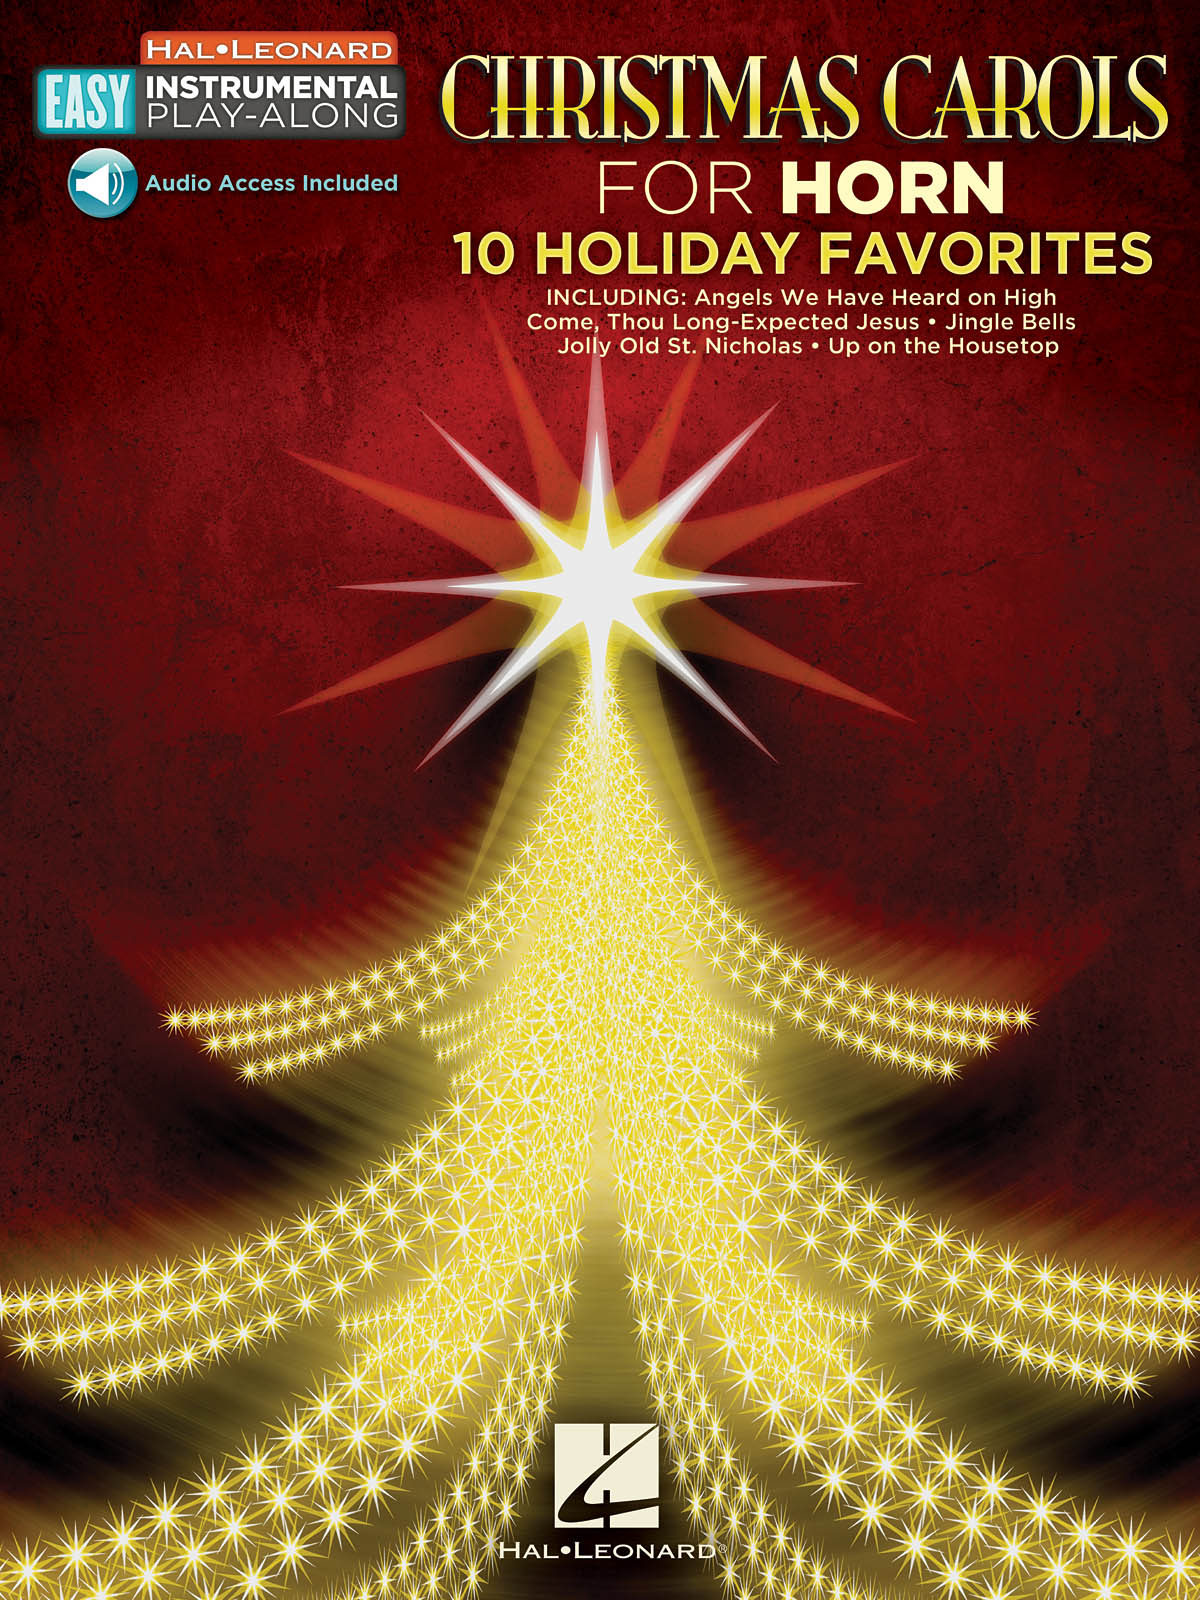 Christmas Carols - Horn: 10 Holiday Favorites - Easy Instrumental Play-Along Book with Online Audio Tracks - noty na lesní roh